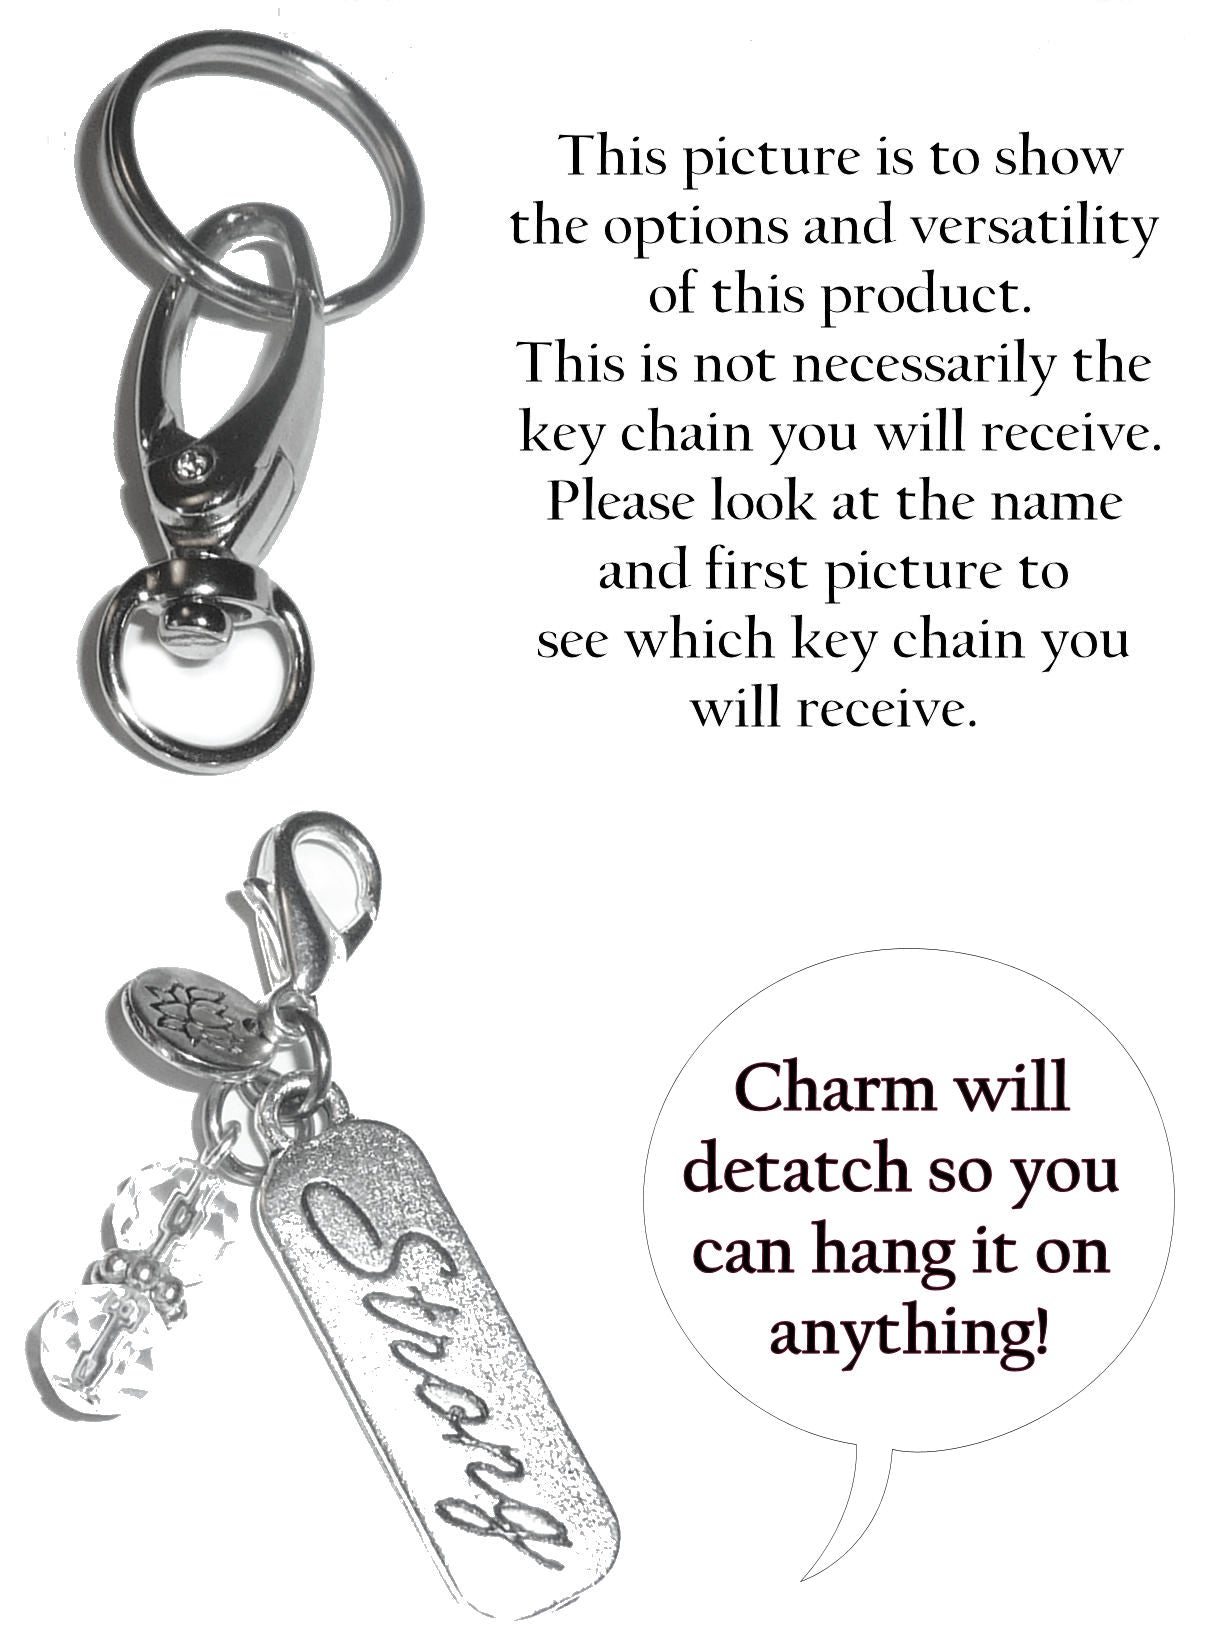 (Flower) Charm Key Chain Ring, Women's Purse or Necklace Charm, Comes in a Gift Box!